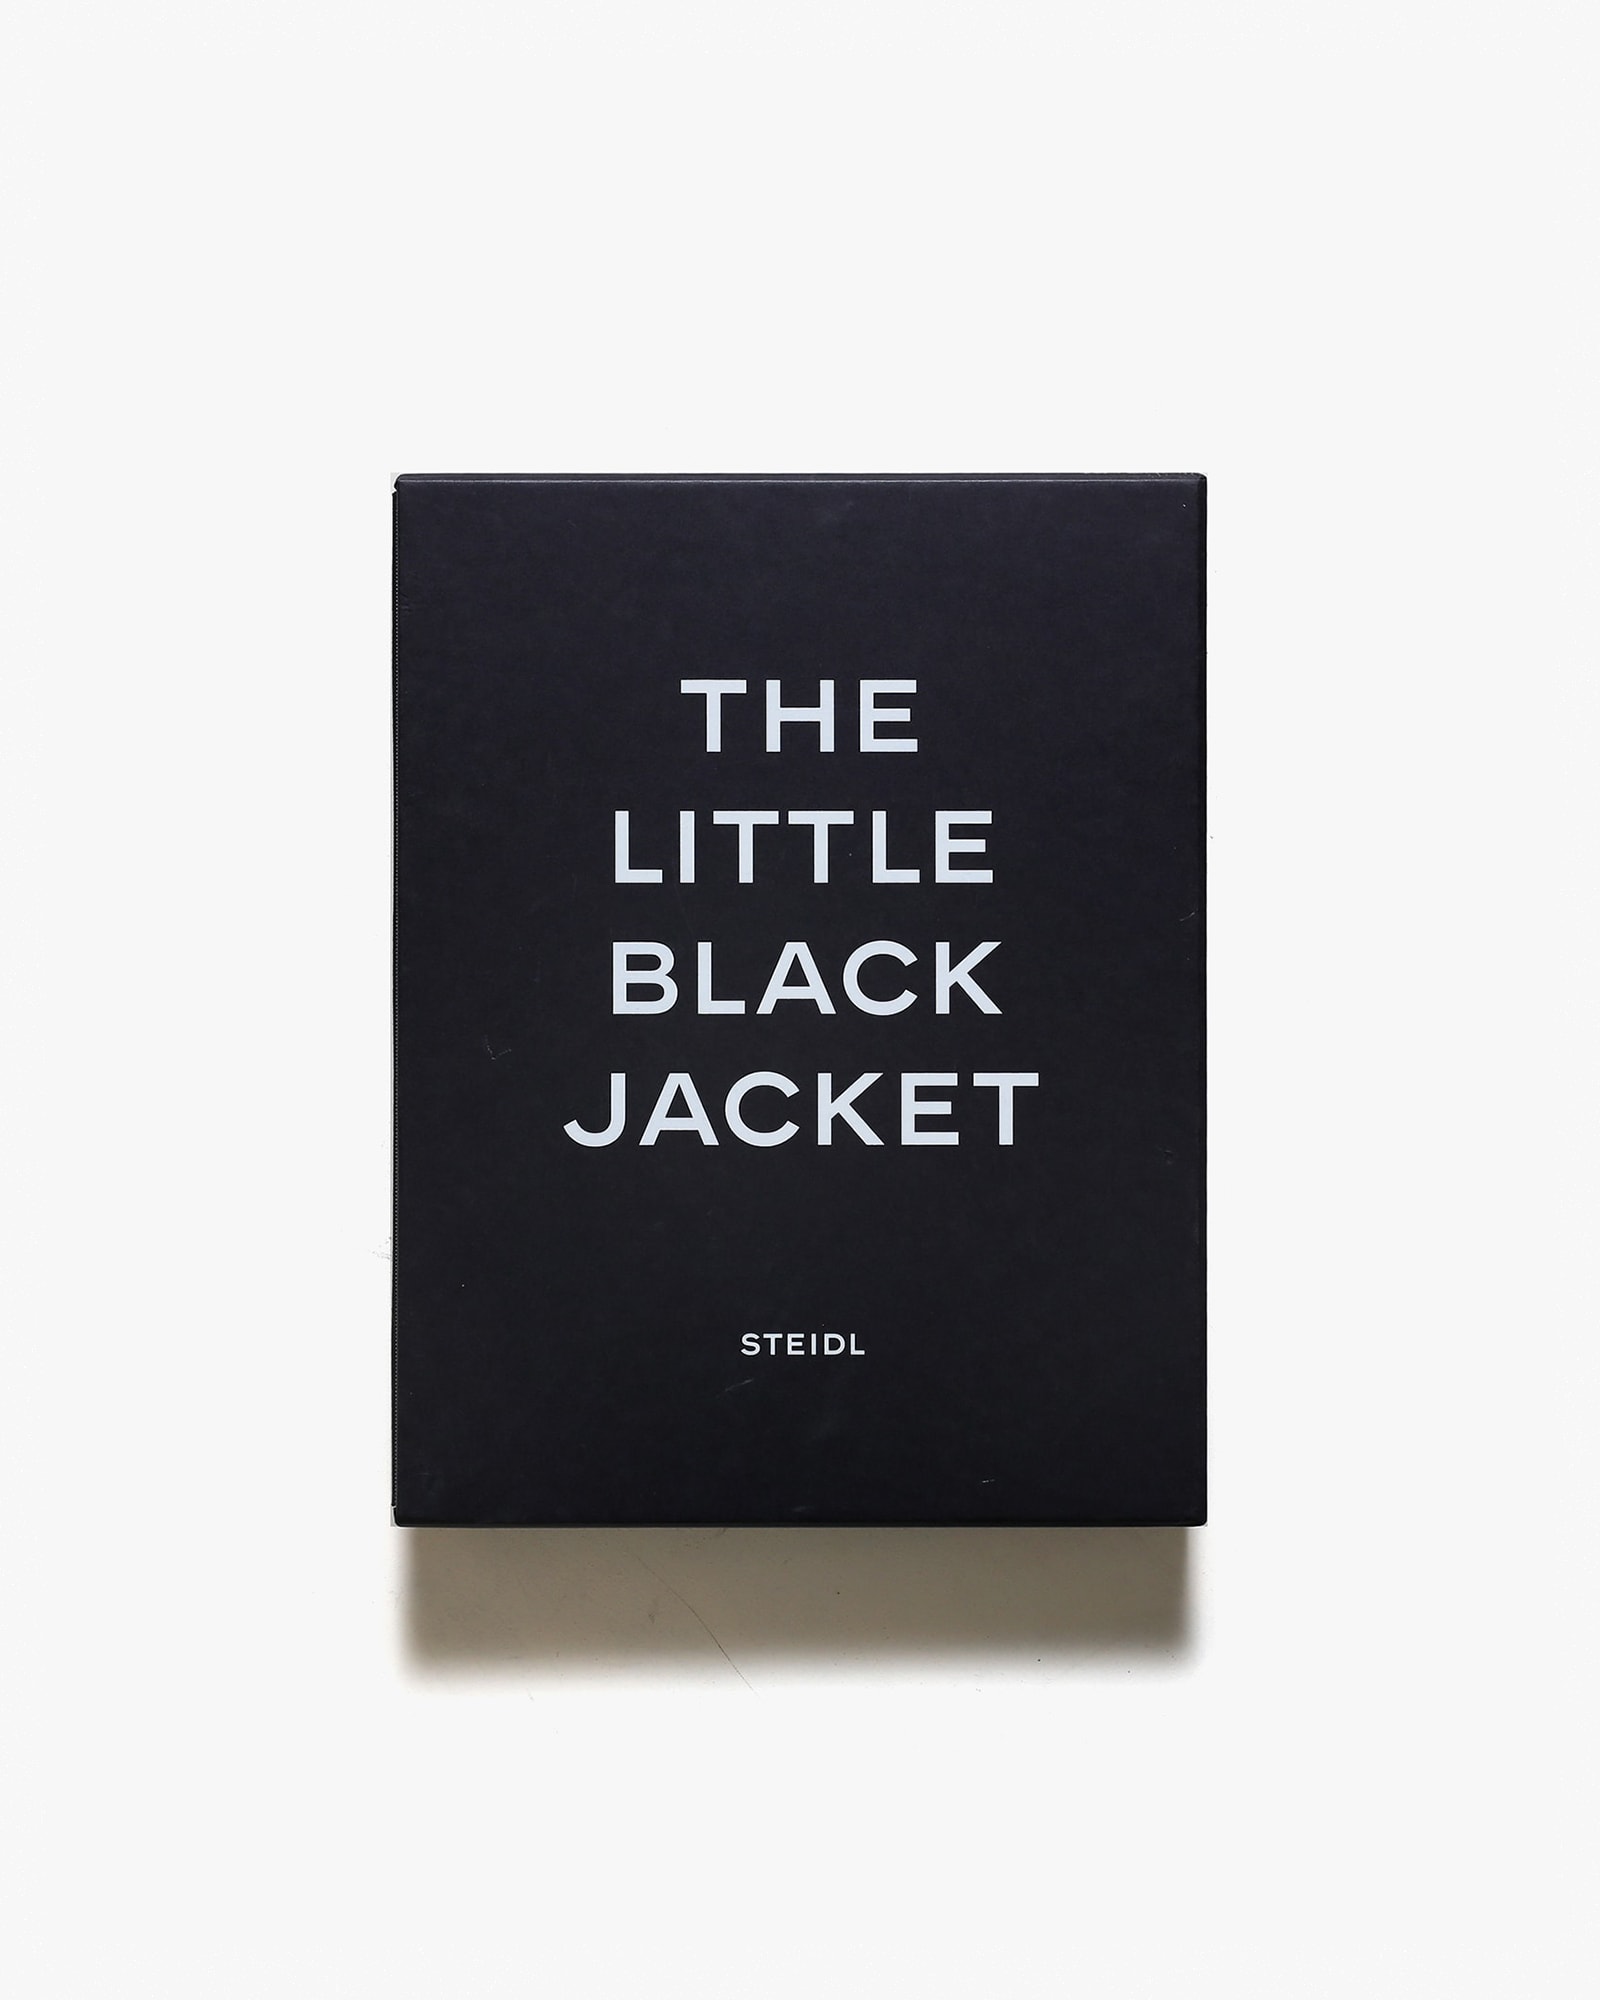 The Little Black Jacket Chanel’s Classic Revisited